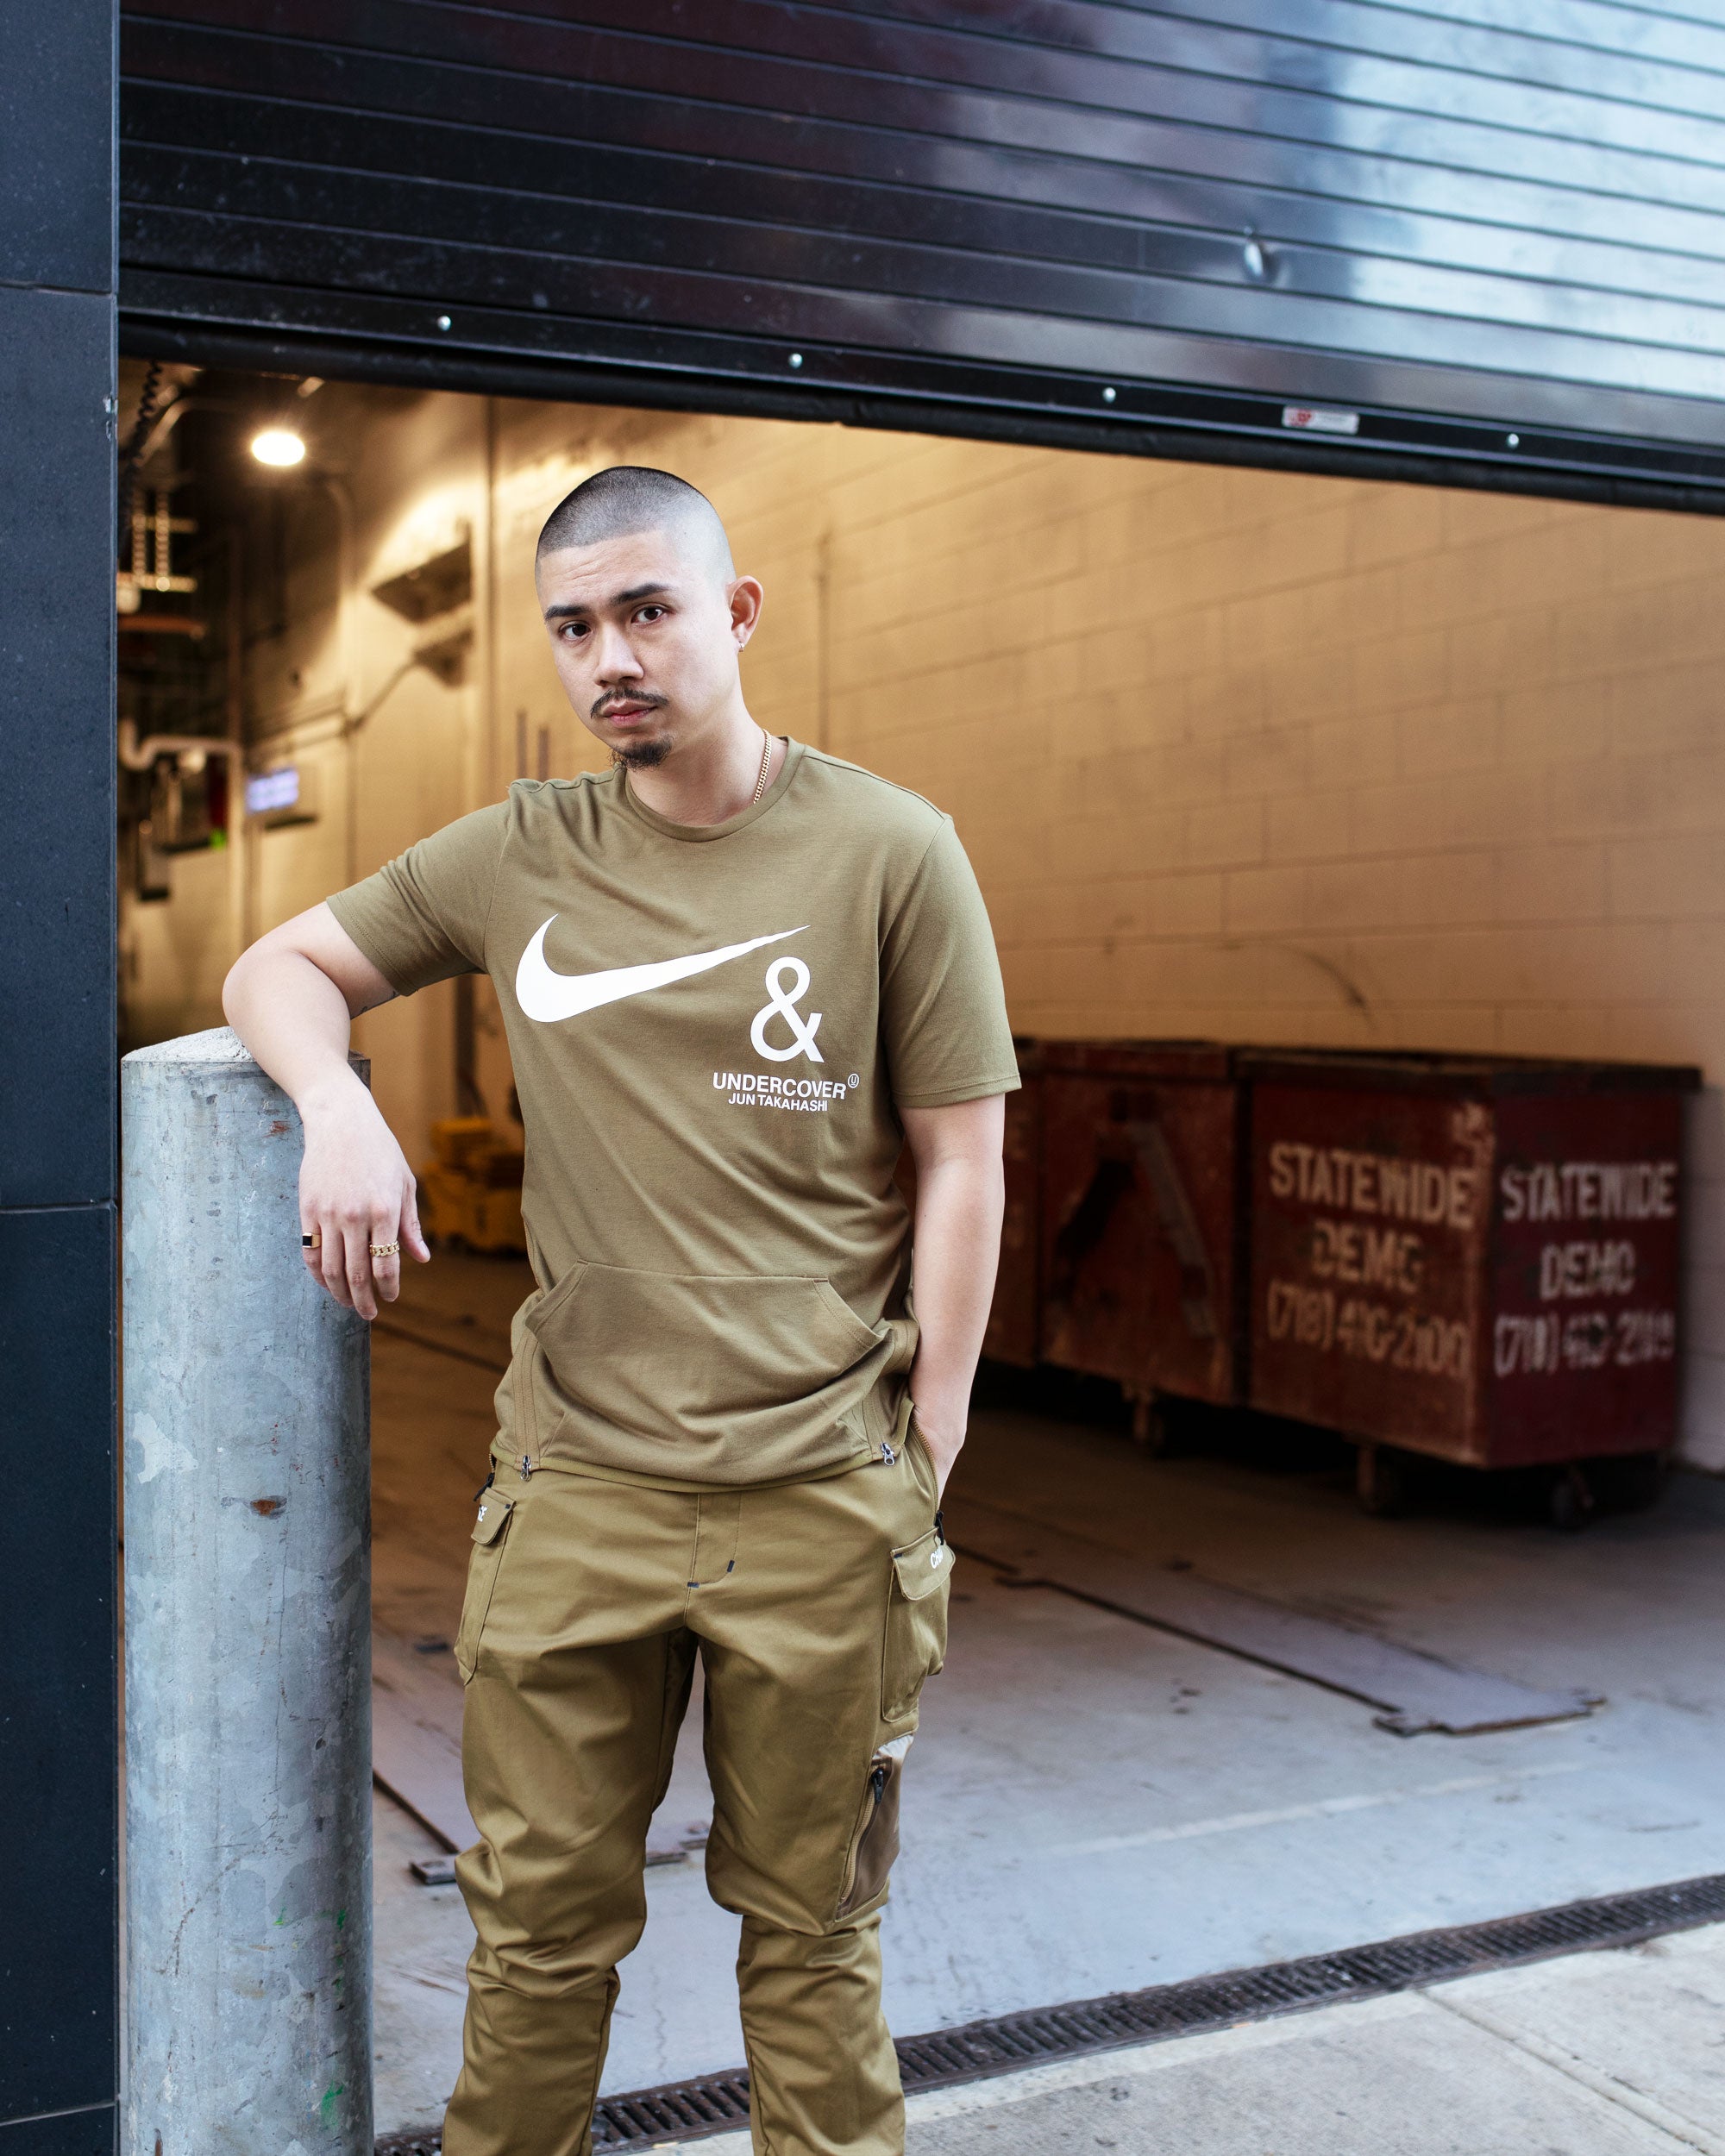 nike x undercover cargo trousers